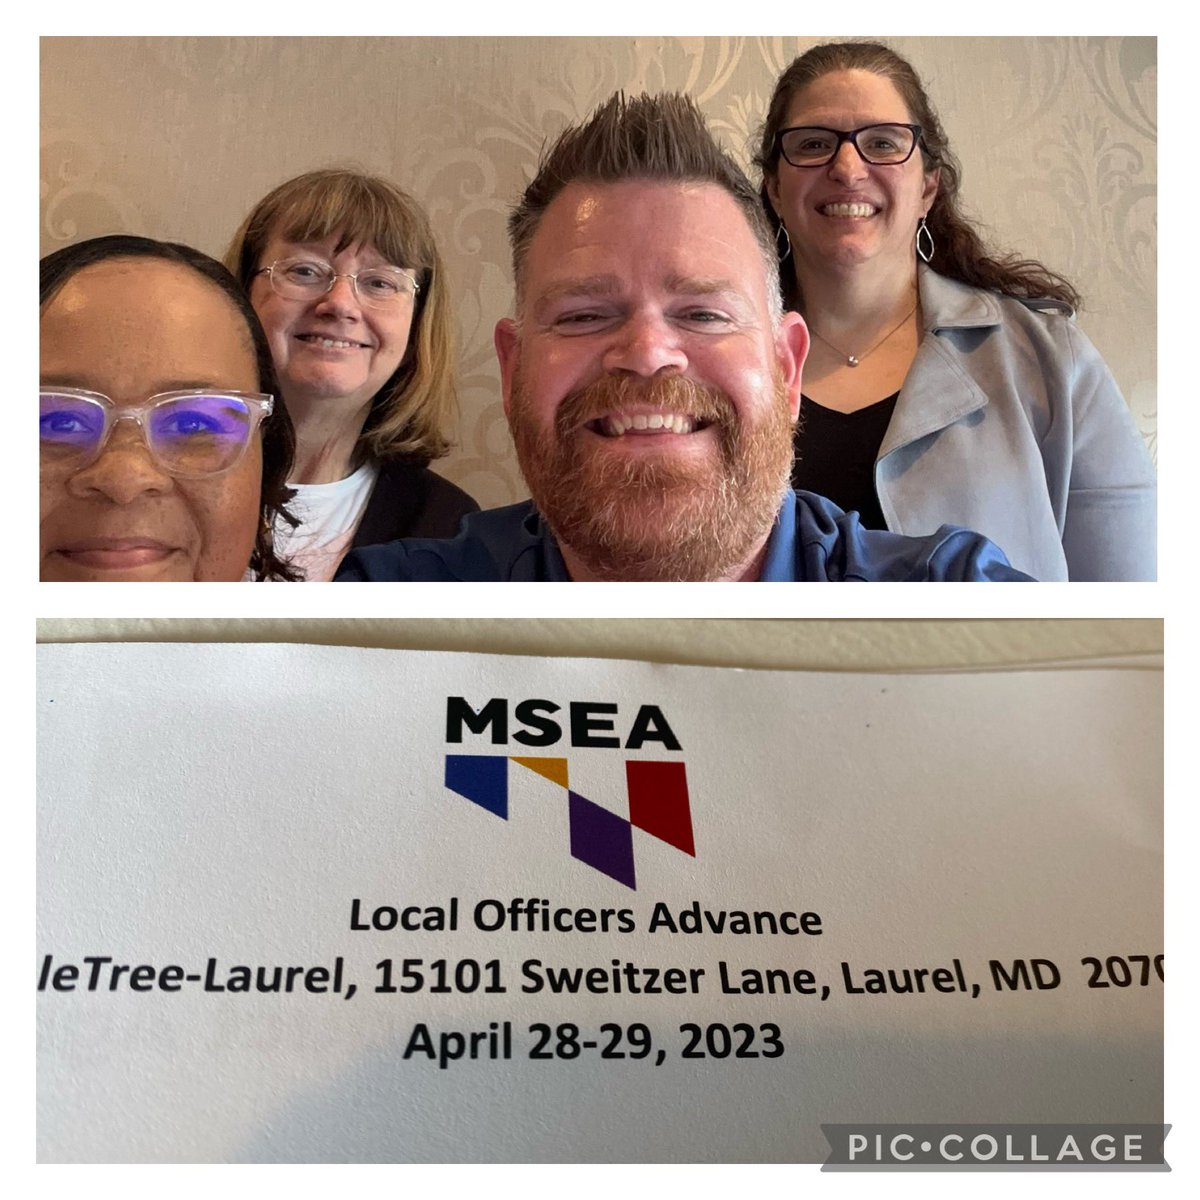 The full officer team (President-Missy Dirks, VP-Justin Heid, Treasurer-Toni Border & Secretary- Dawn Lynch) is spending the weekend learning with other officers from around the state. 
#alwayslearning #unionstrong #strongschools